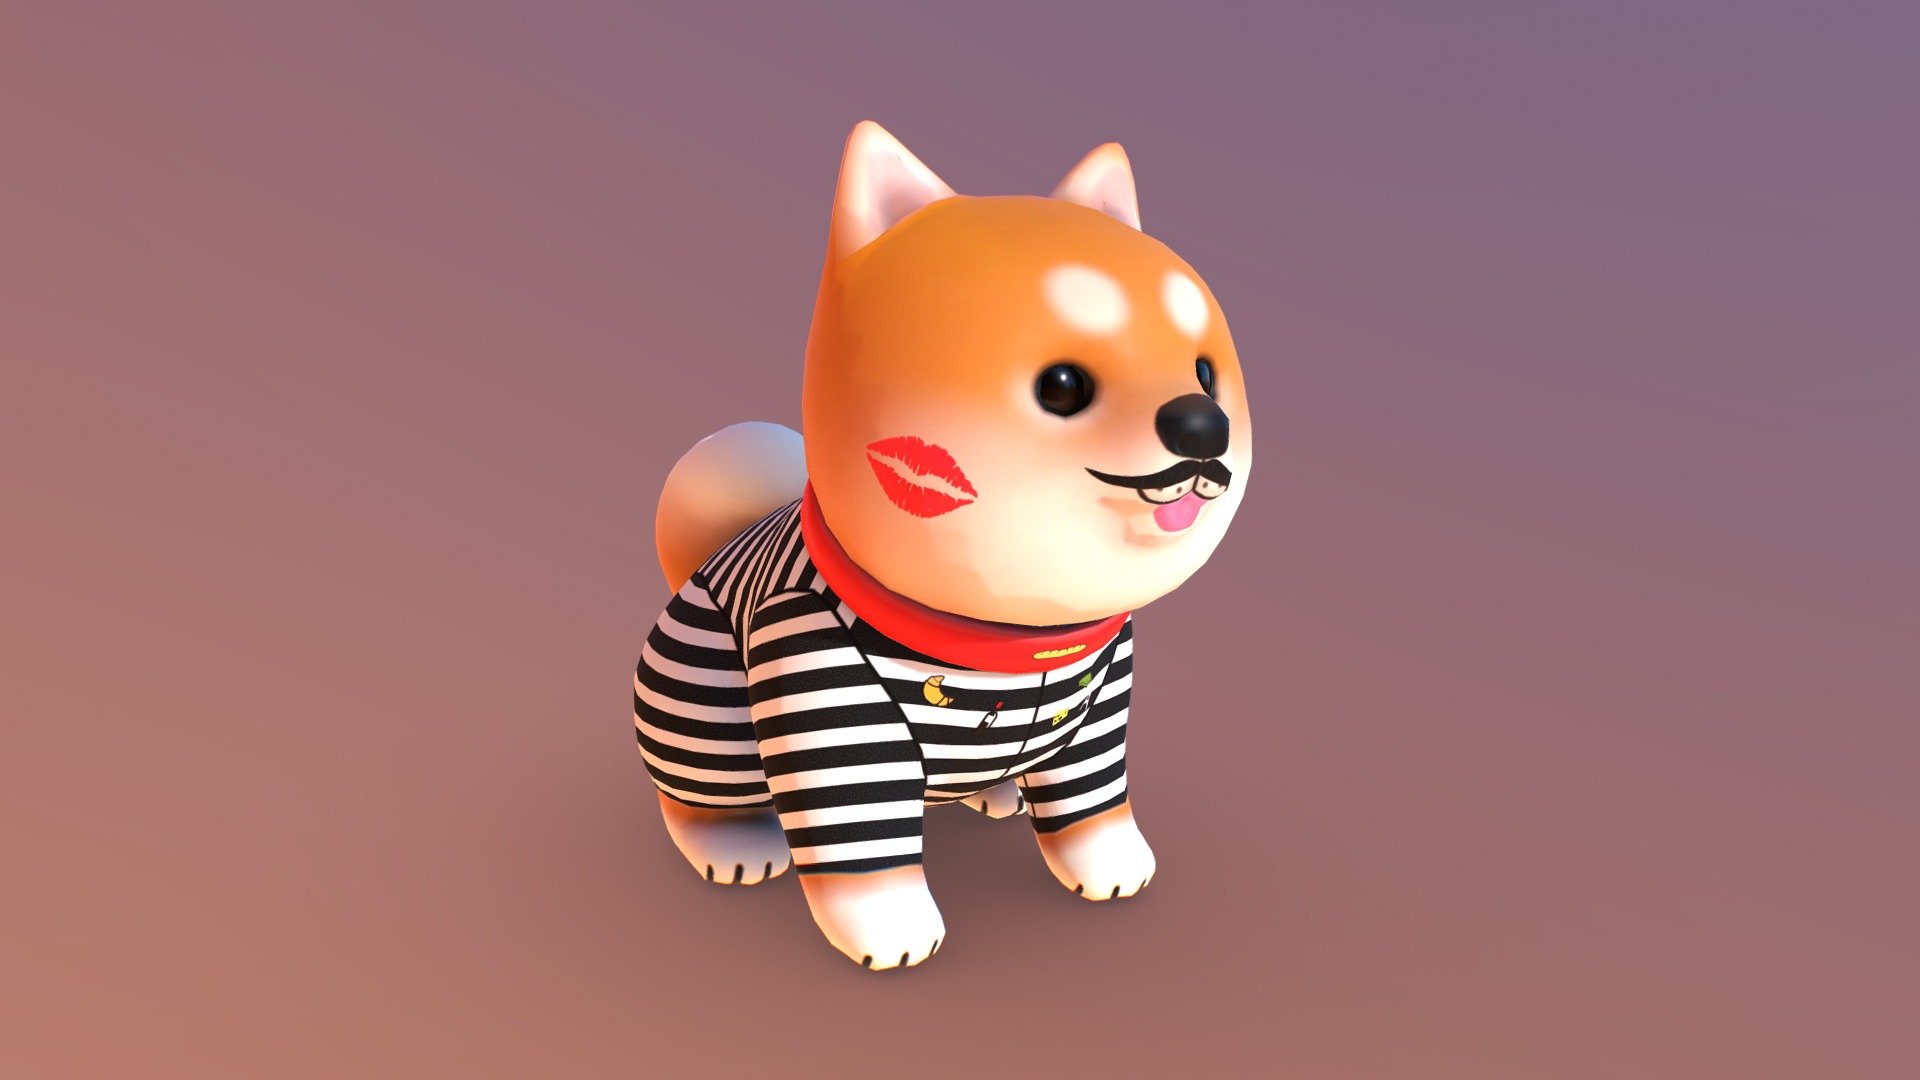 Hello ! 

Here is my participation for the &ldquo;Sketchfab Texturing Challenge: Shiba Inu